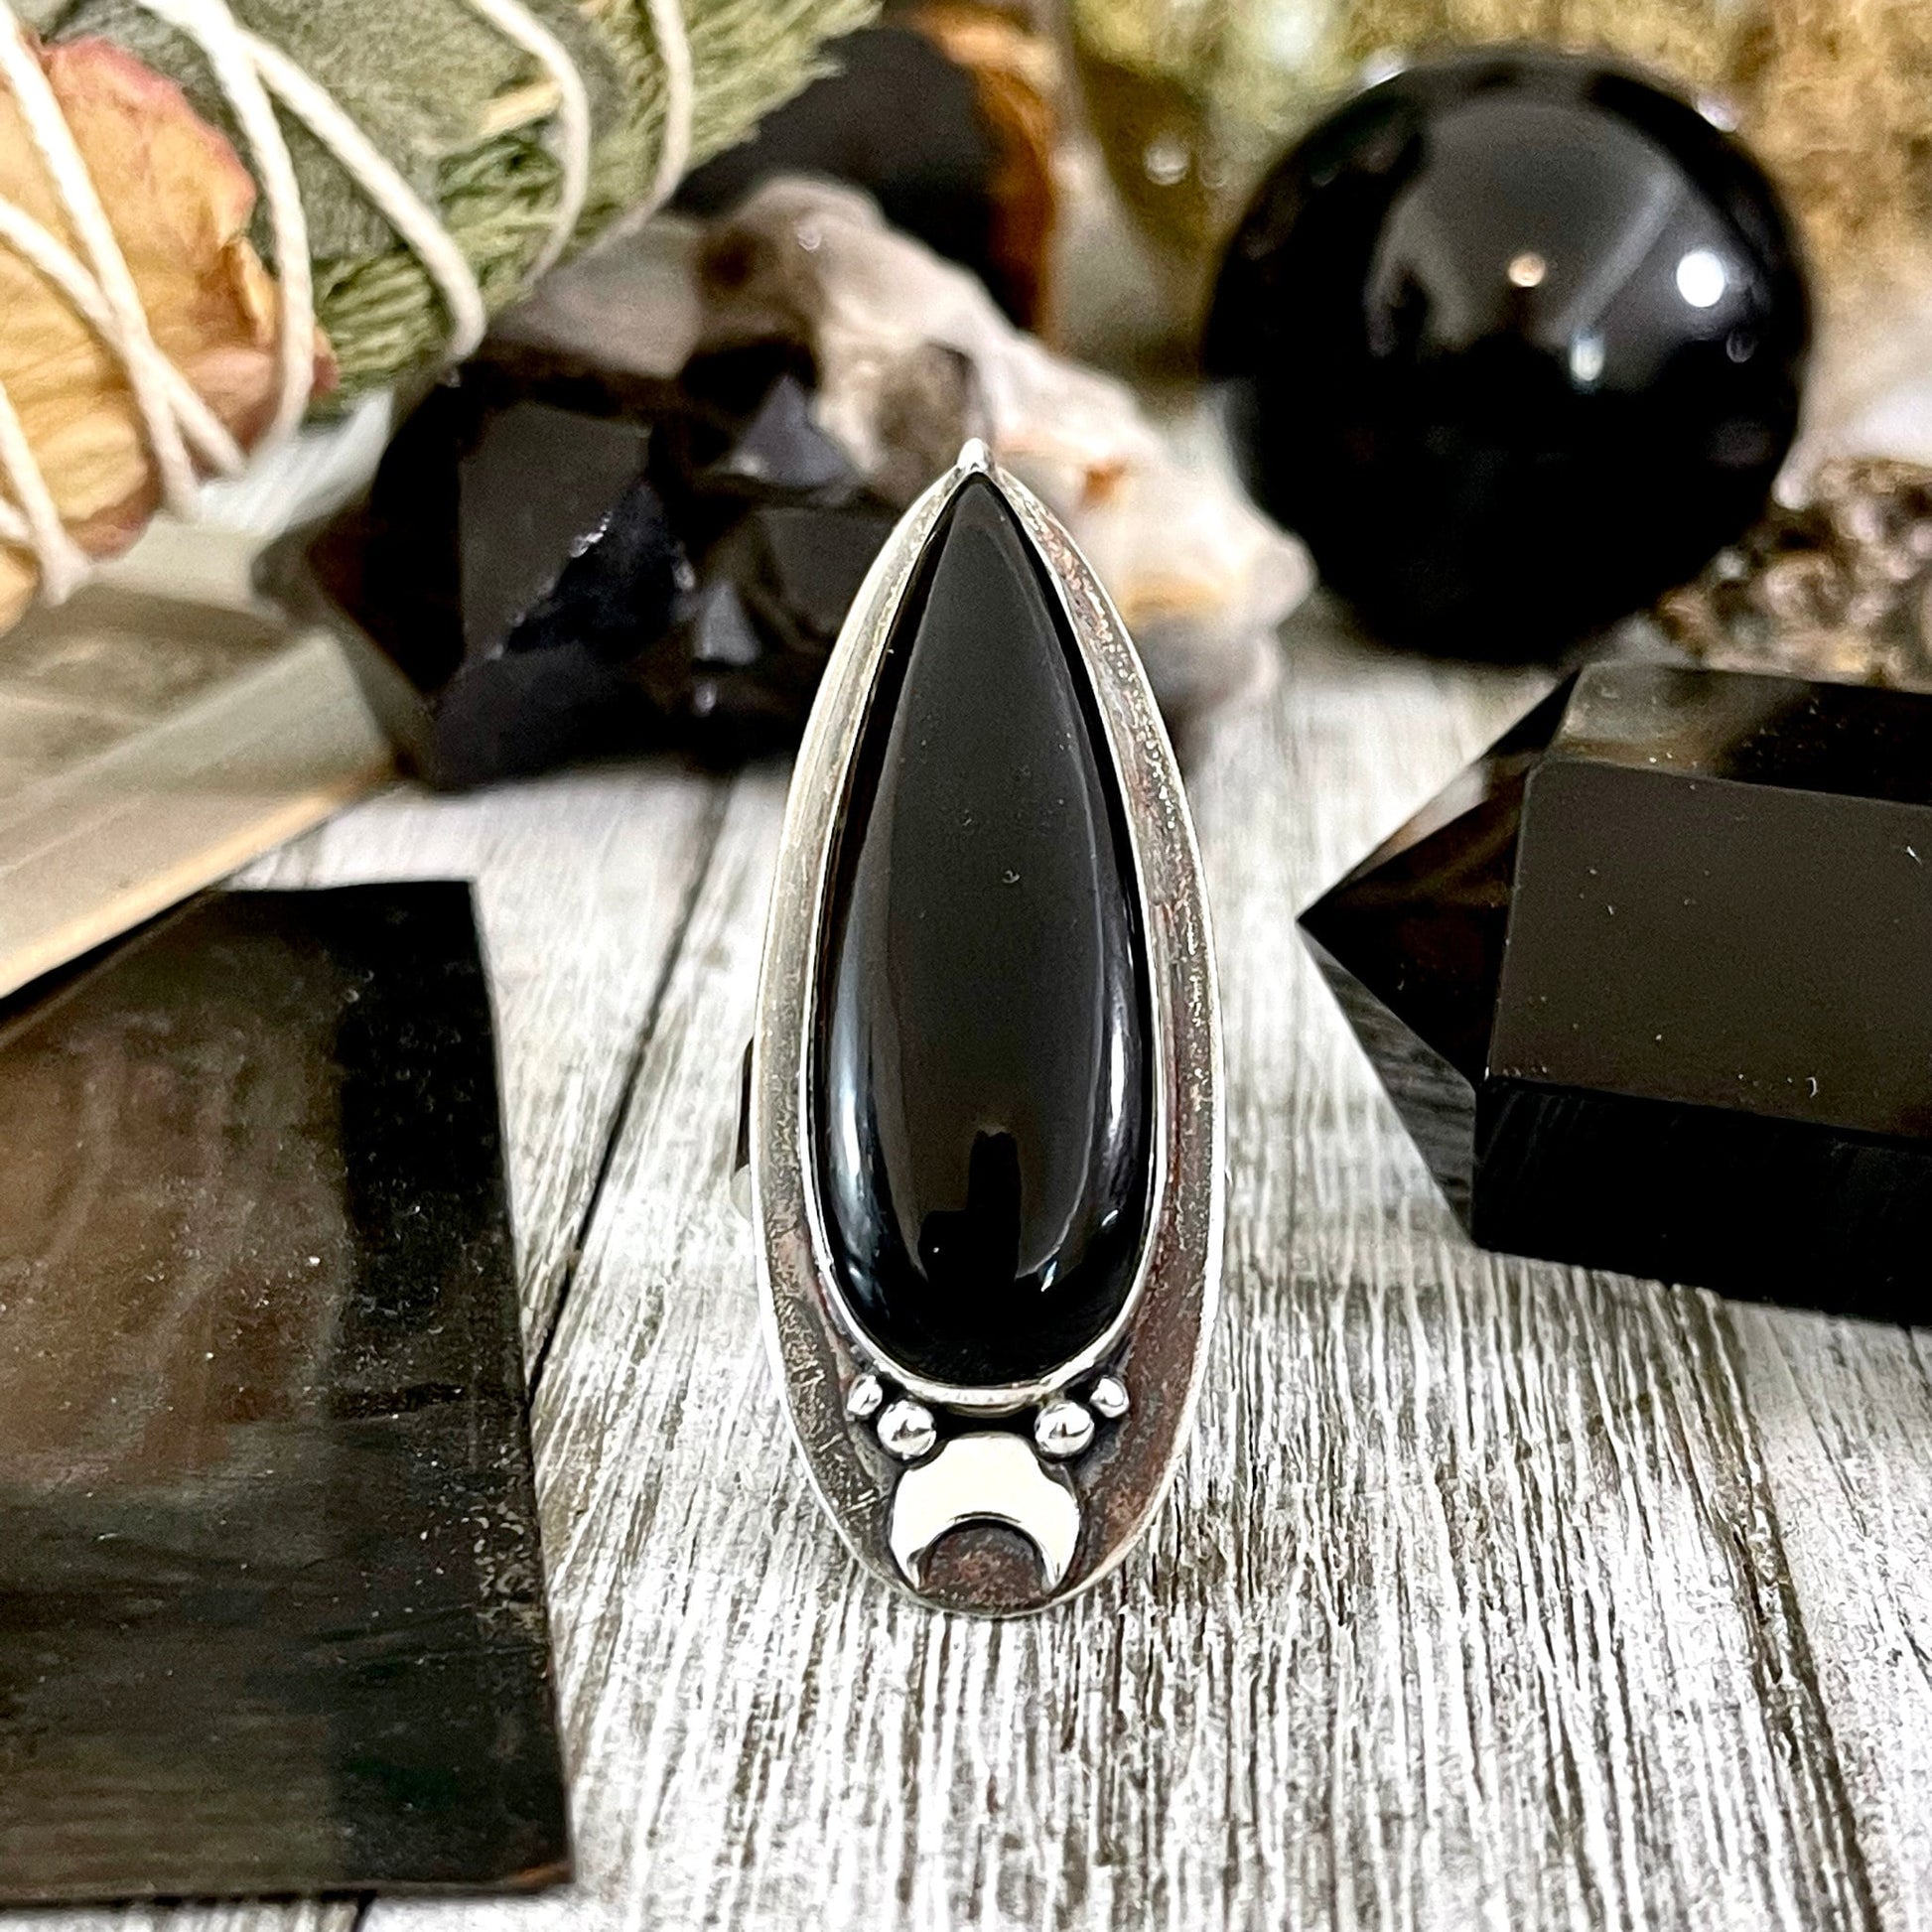 Big Crystal Ring, Black Crystal Ring, Black Onyx Ring, Black Stone Ring, Bohemian Jewelry, Bohemian Ring, Dark Witchy Jewelry, Etsy ID: 1088283866, Foxlark Alchemy, FOXLARK- RINGS, Goth Jewelry, Jewelry, Moon Jewelry, Moon Ring, Rings, Statement Rings, St